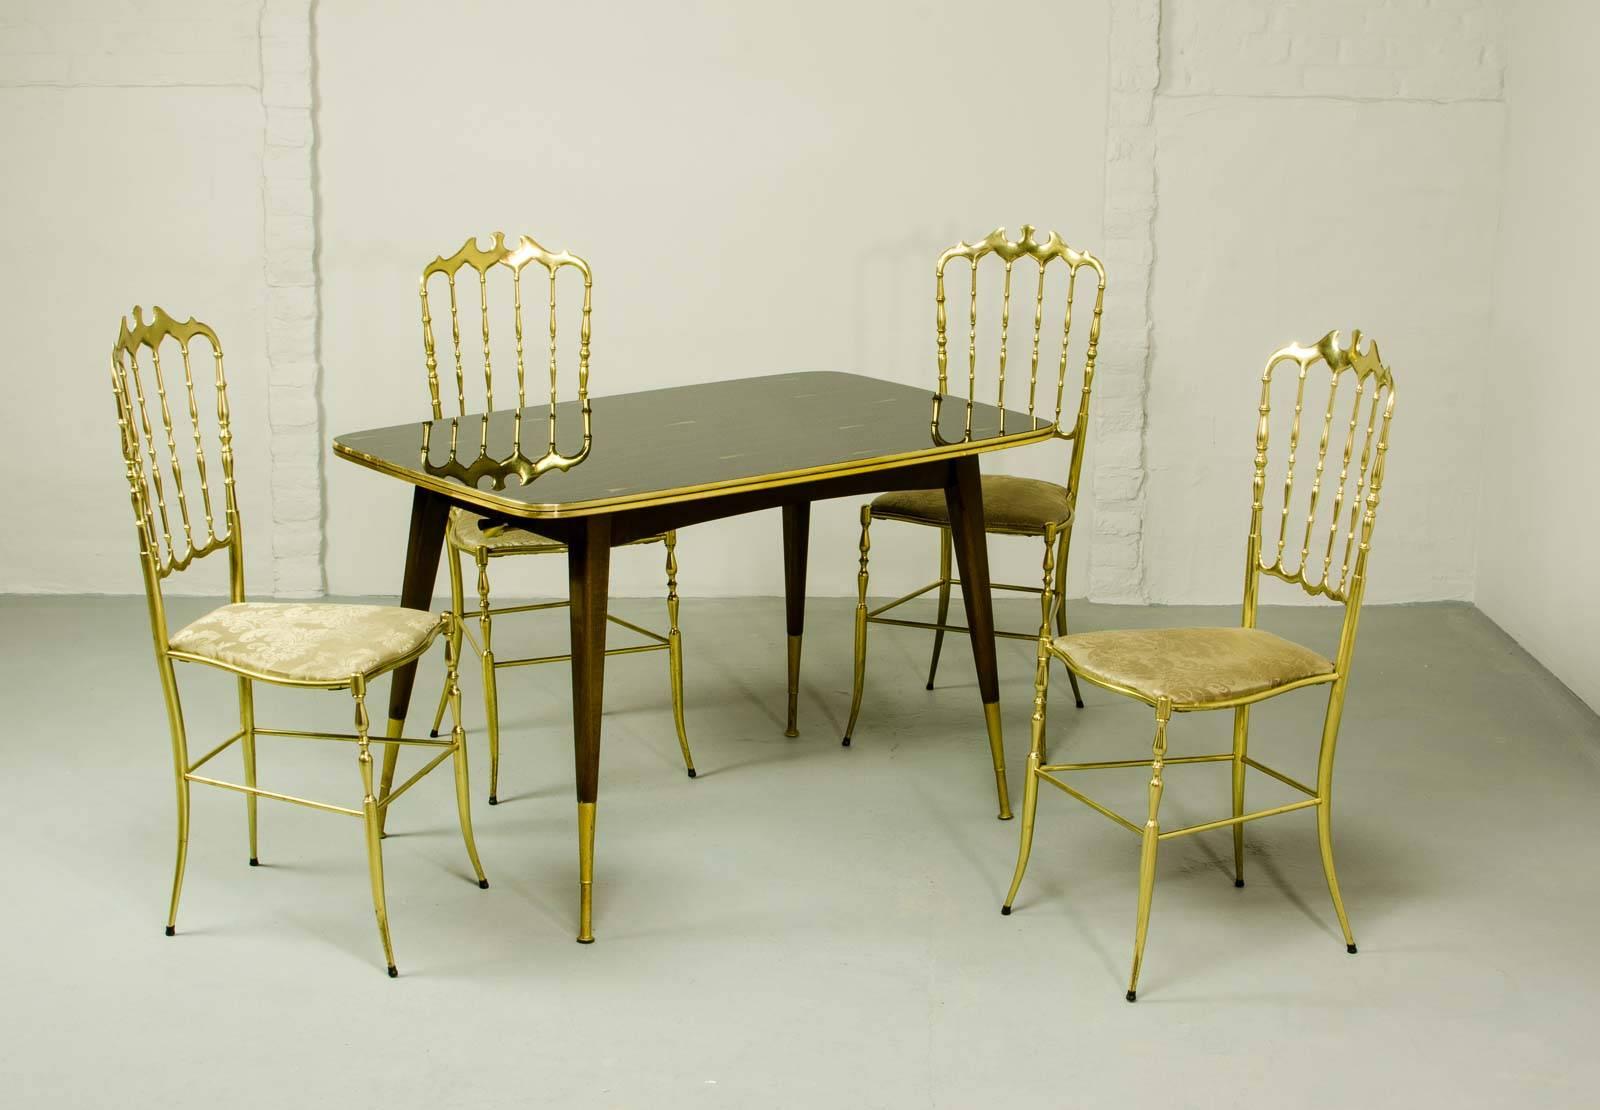 Very elegant set of four Midcentury Italian brass Chiavari spindle back chairs and matching stylish game / card table. The polished brass chairs with padded seats upholstered in golden gobelin fabric are designed by Giuseppe Gaetano Descalzi for